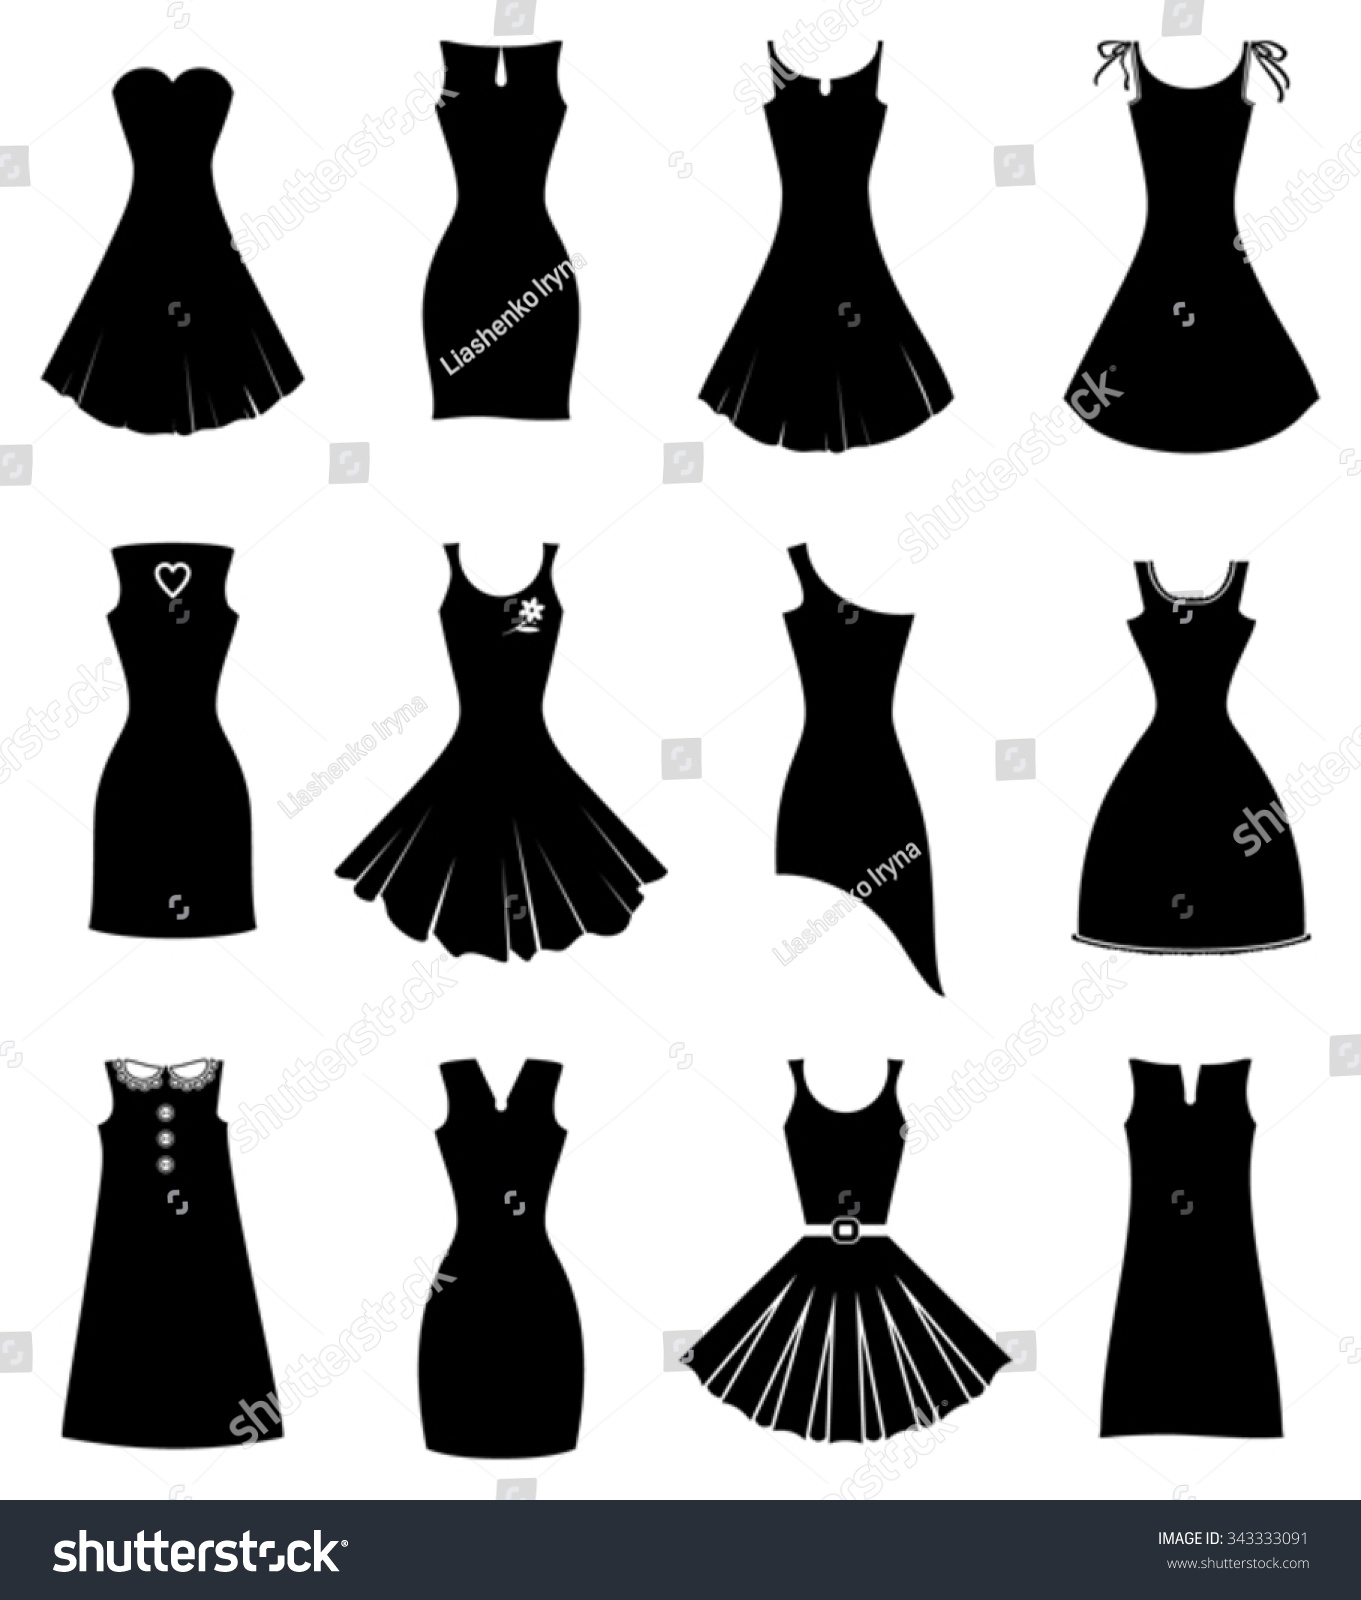 Different Black Party Dress Silhouette Set Stock Vector 343333091 ...